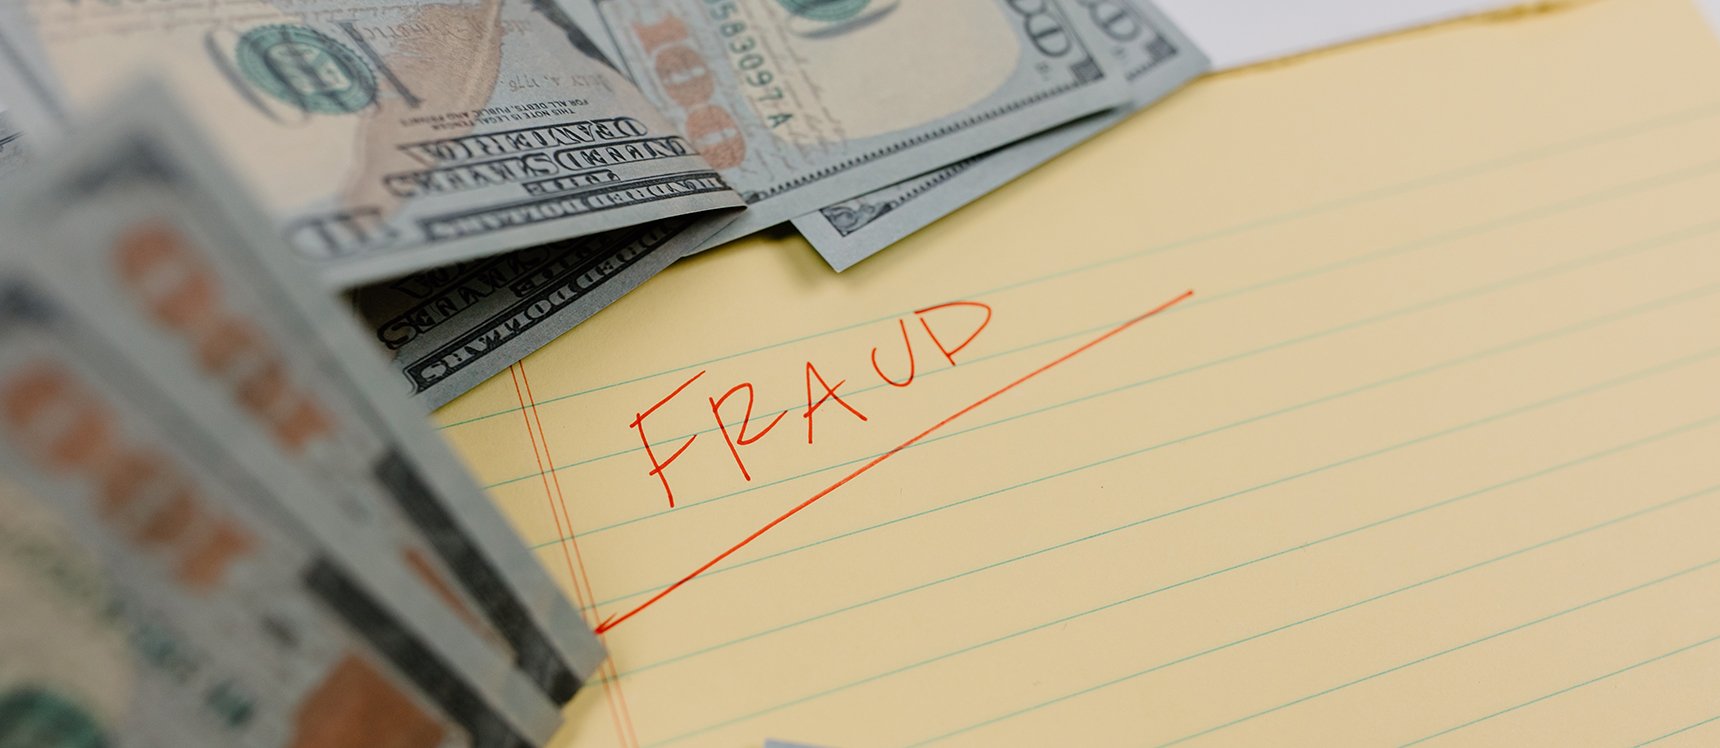 image of a notebook with the word fraud written it surrounded by cash